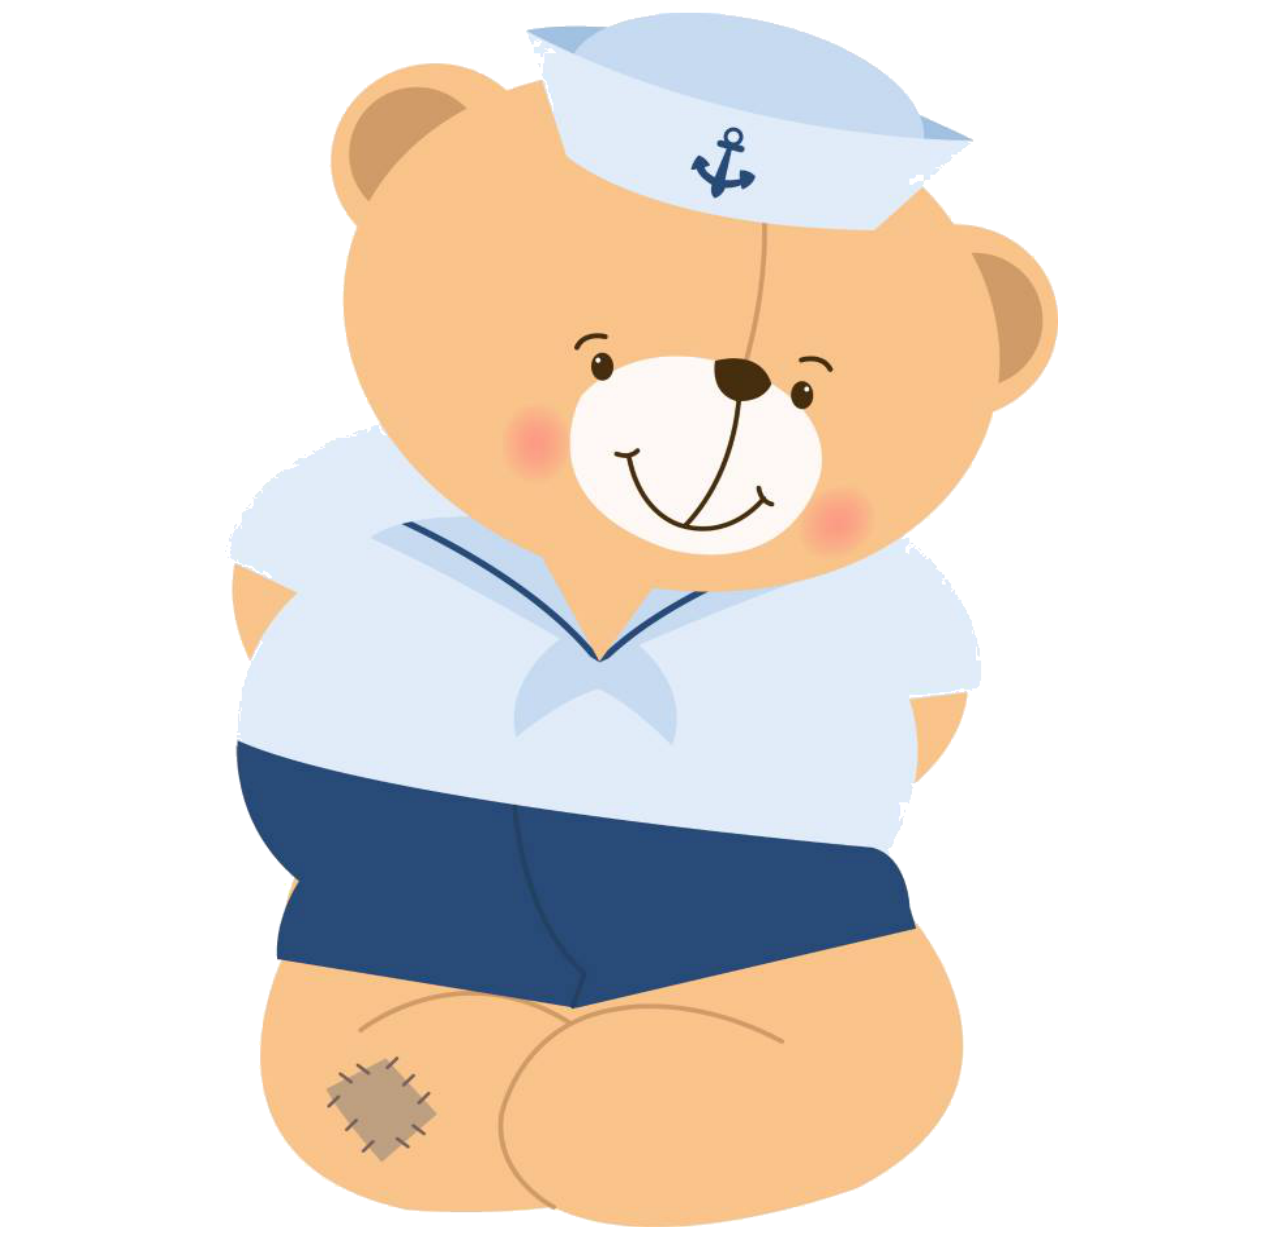 sailor clipart baby shower